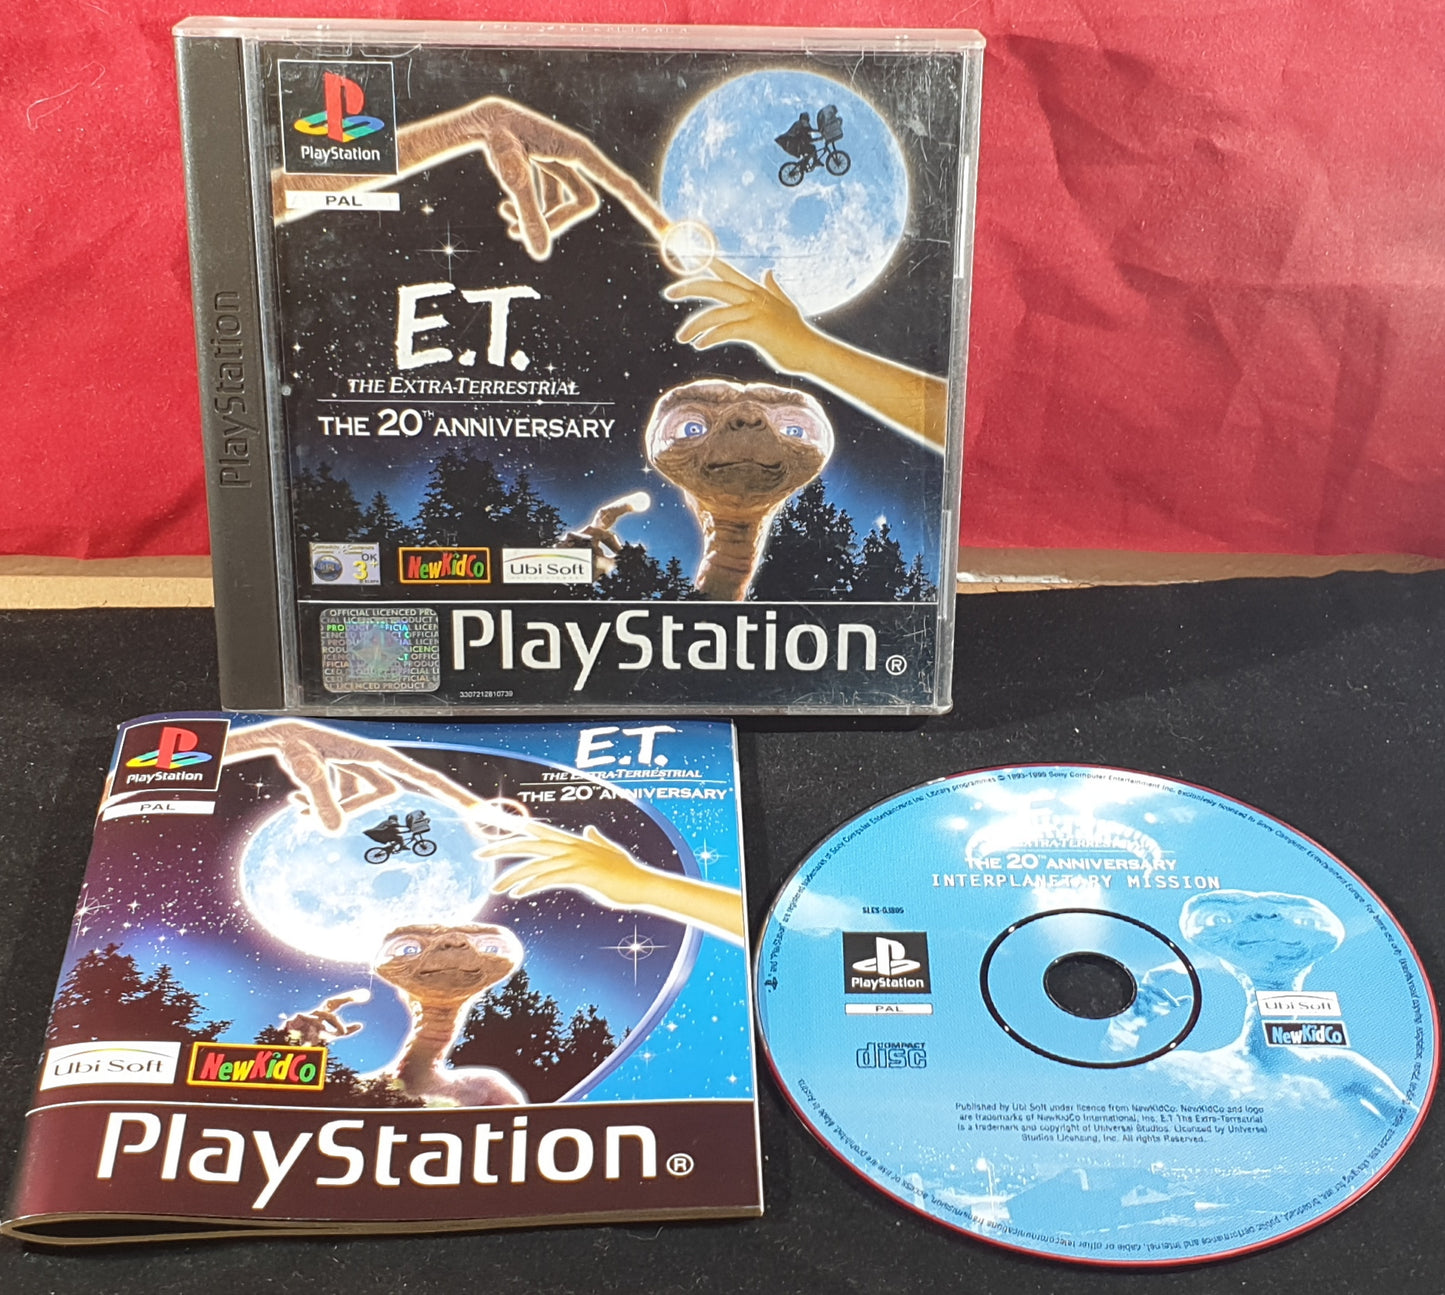 E.T the Extra-Terrestrial Interplanetary Mission Sony Playstation 1 (PS1) Game